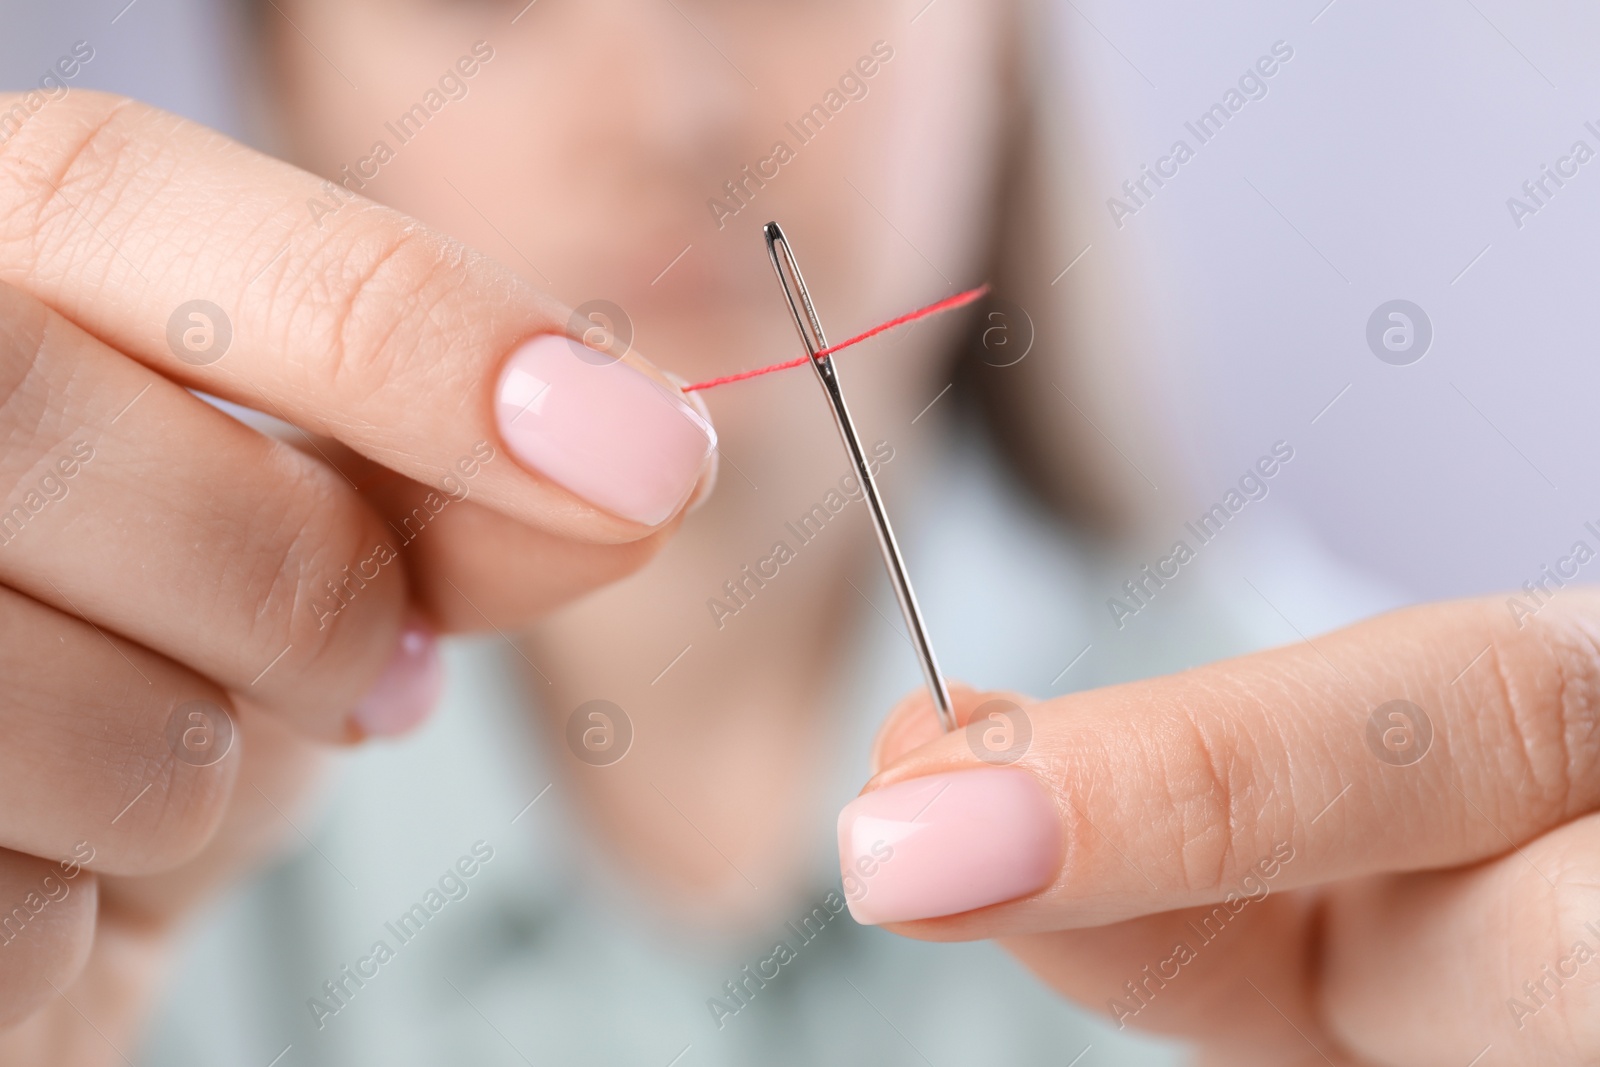 Photo of Woman threading needle, closeup view. Sewing equipment